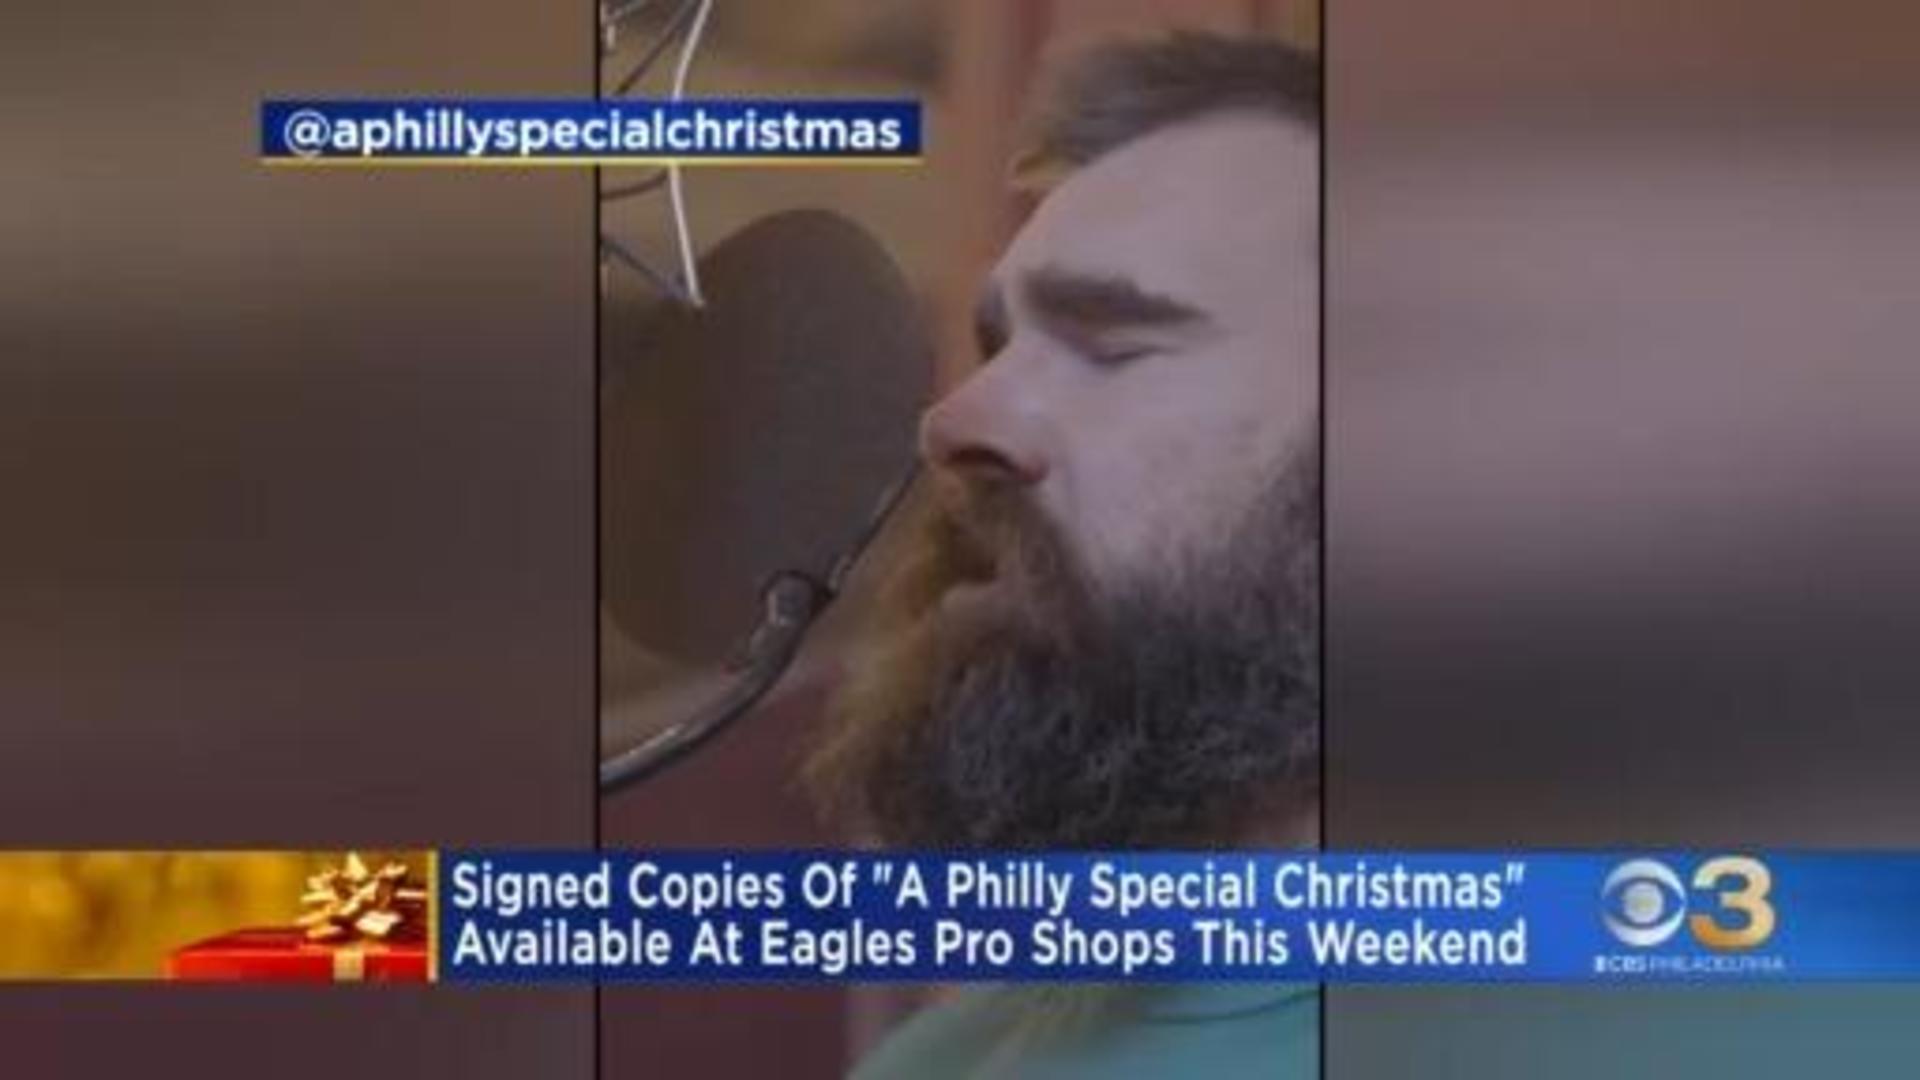 It's a Miracle: You Can Still Get the Eagles Christmas Album